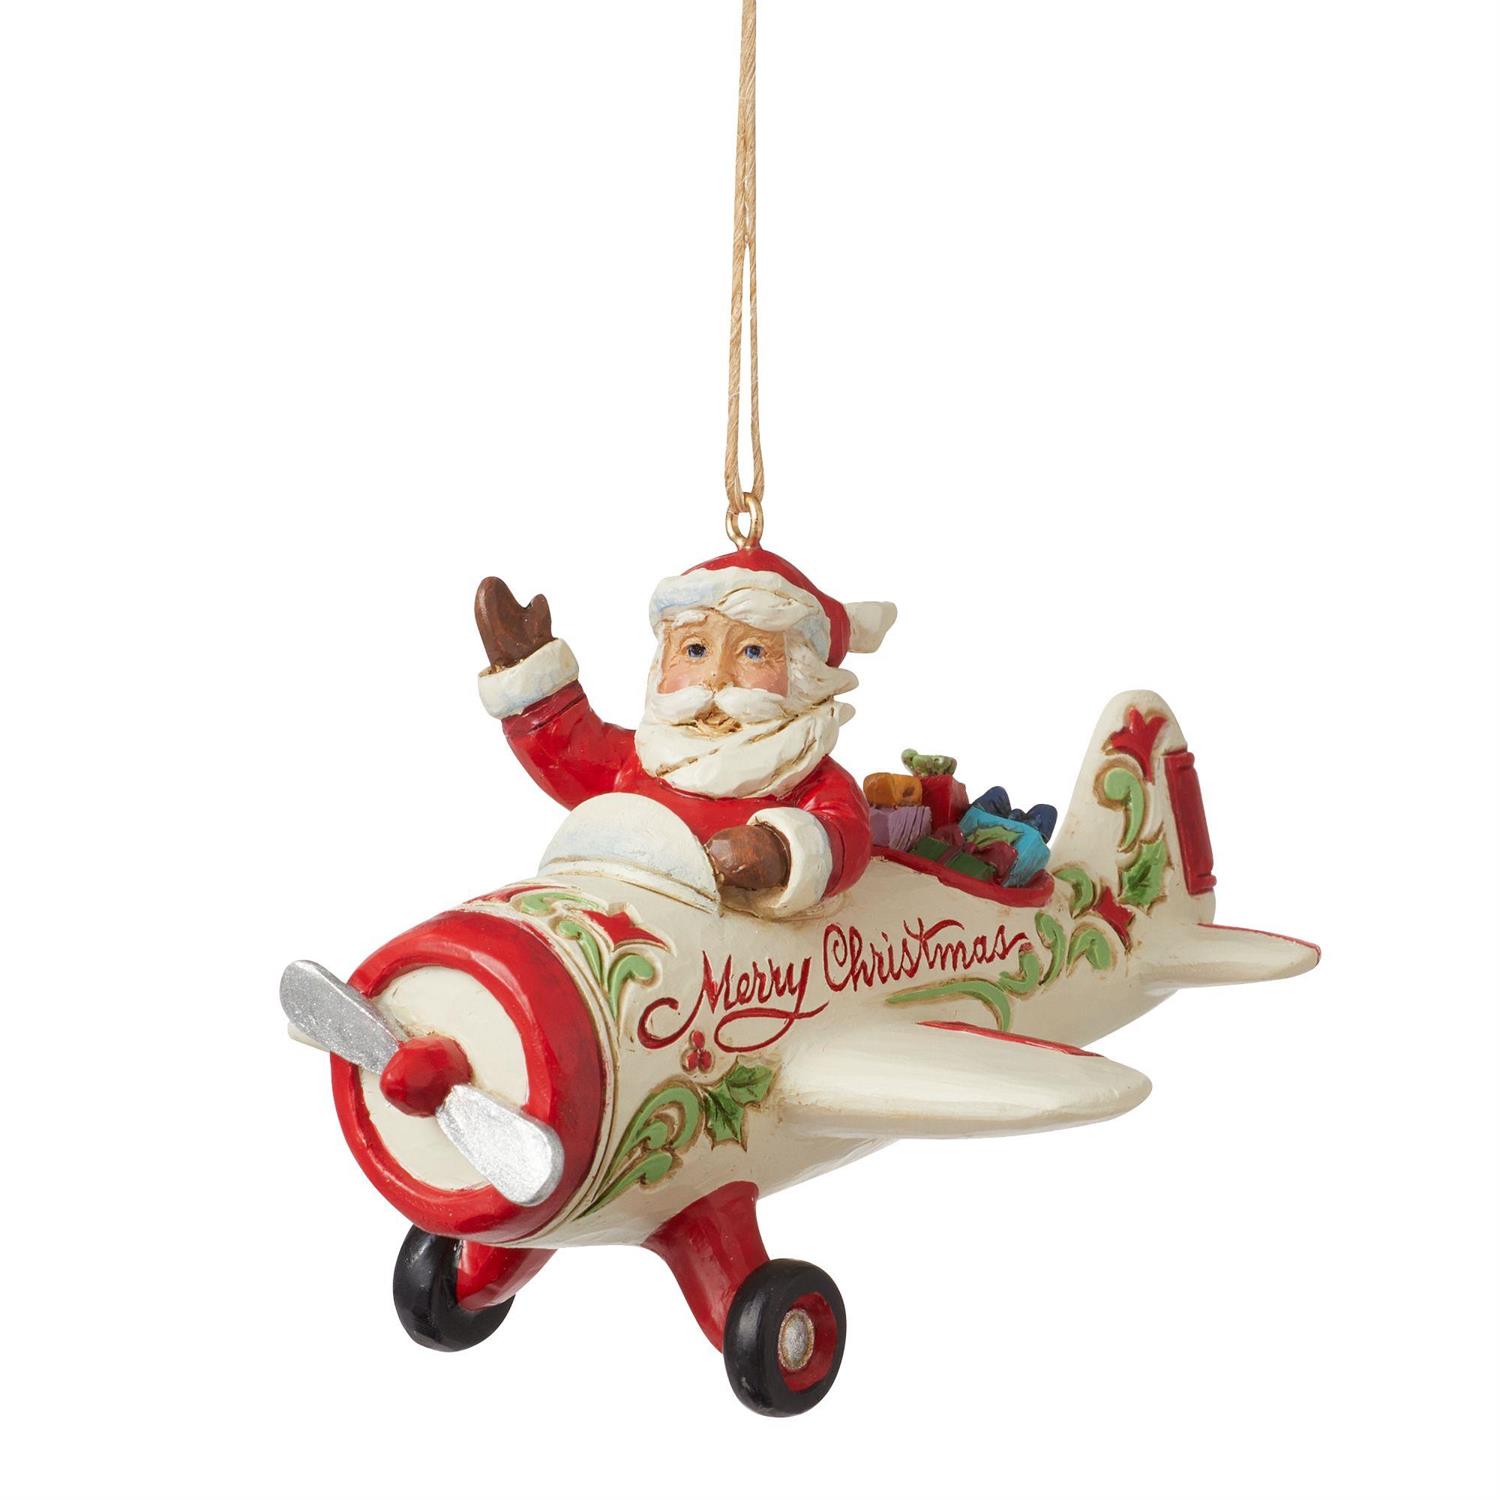 Enesco Gifts Jim Shore Heartwood Creek Santa in Airplane Ornament Free Shipping Iveys Gifts And Decor